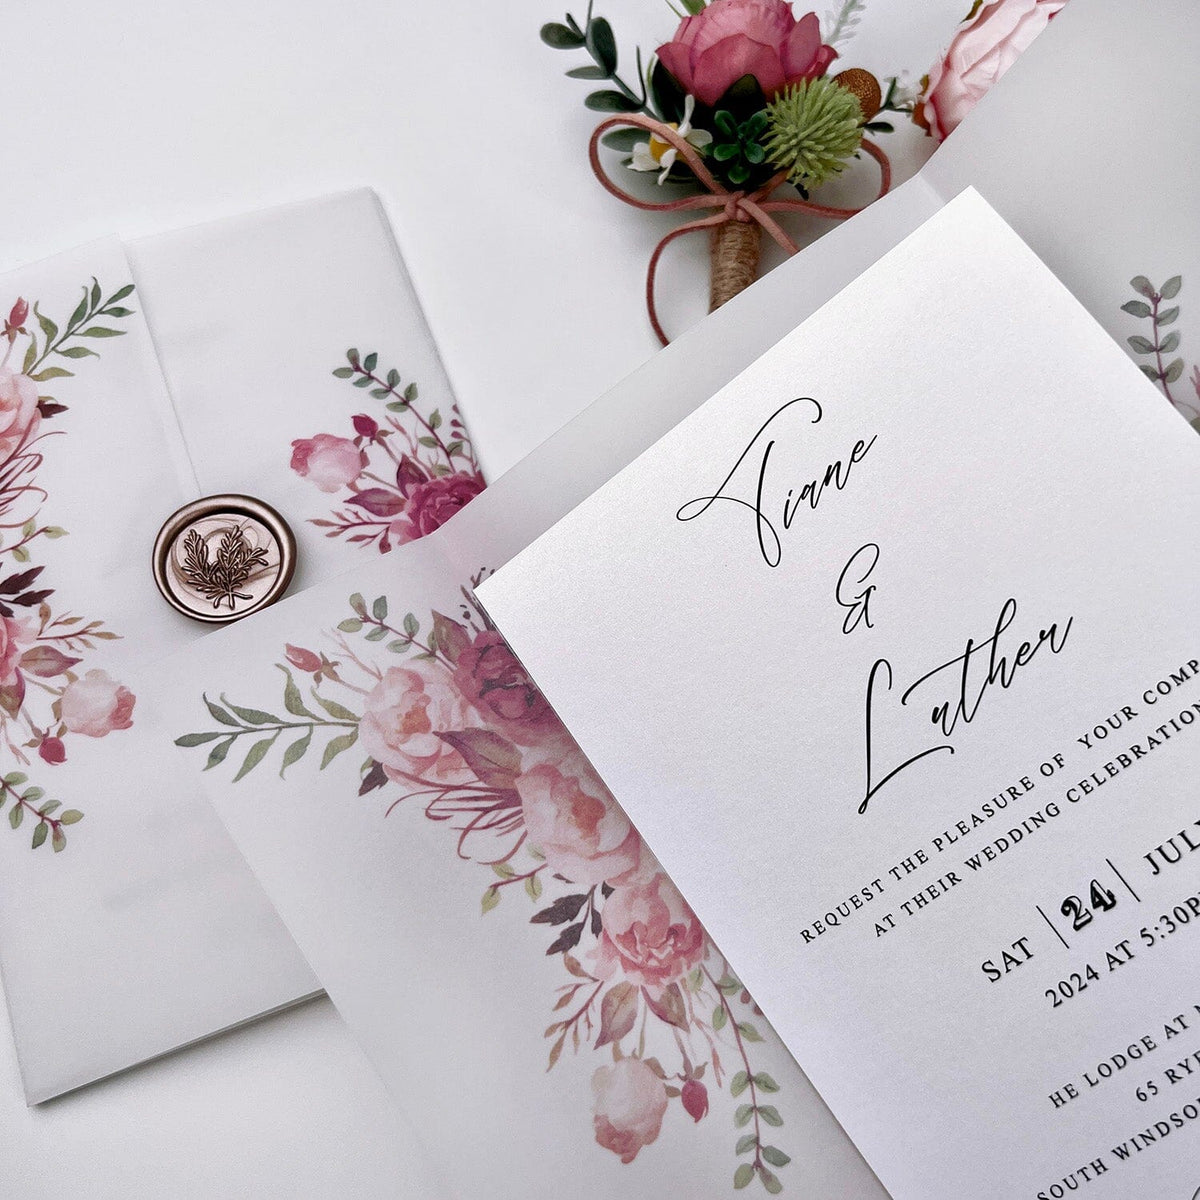 Burgundy Floral Wedding Invited Vellum Paper Wrap with Handmade Paper